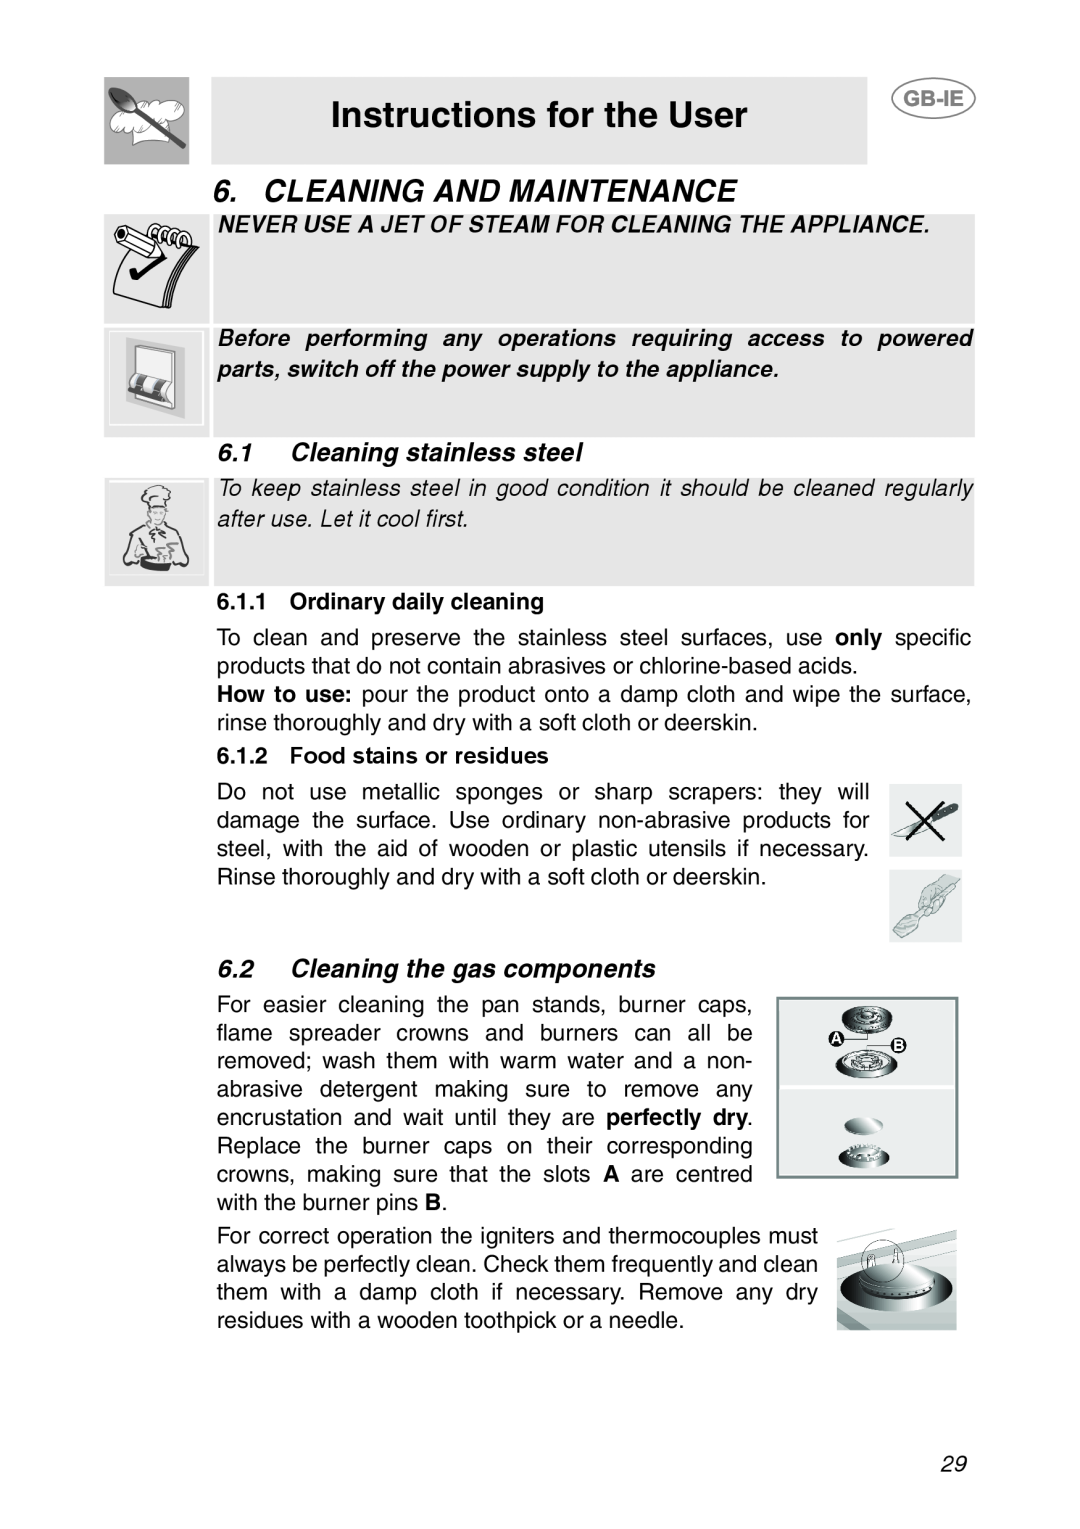 Smeg HB96GXBE3 Cleaning And Maintenance, Instructions for the User, 6.1Cleaning stainless steel, Ordinary daily cleaning 